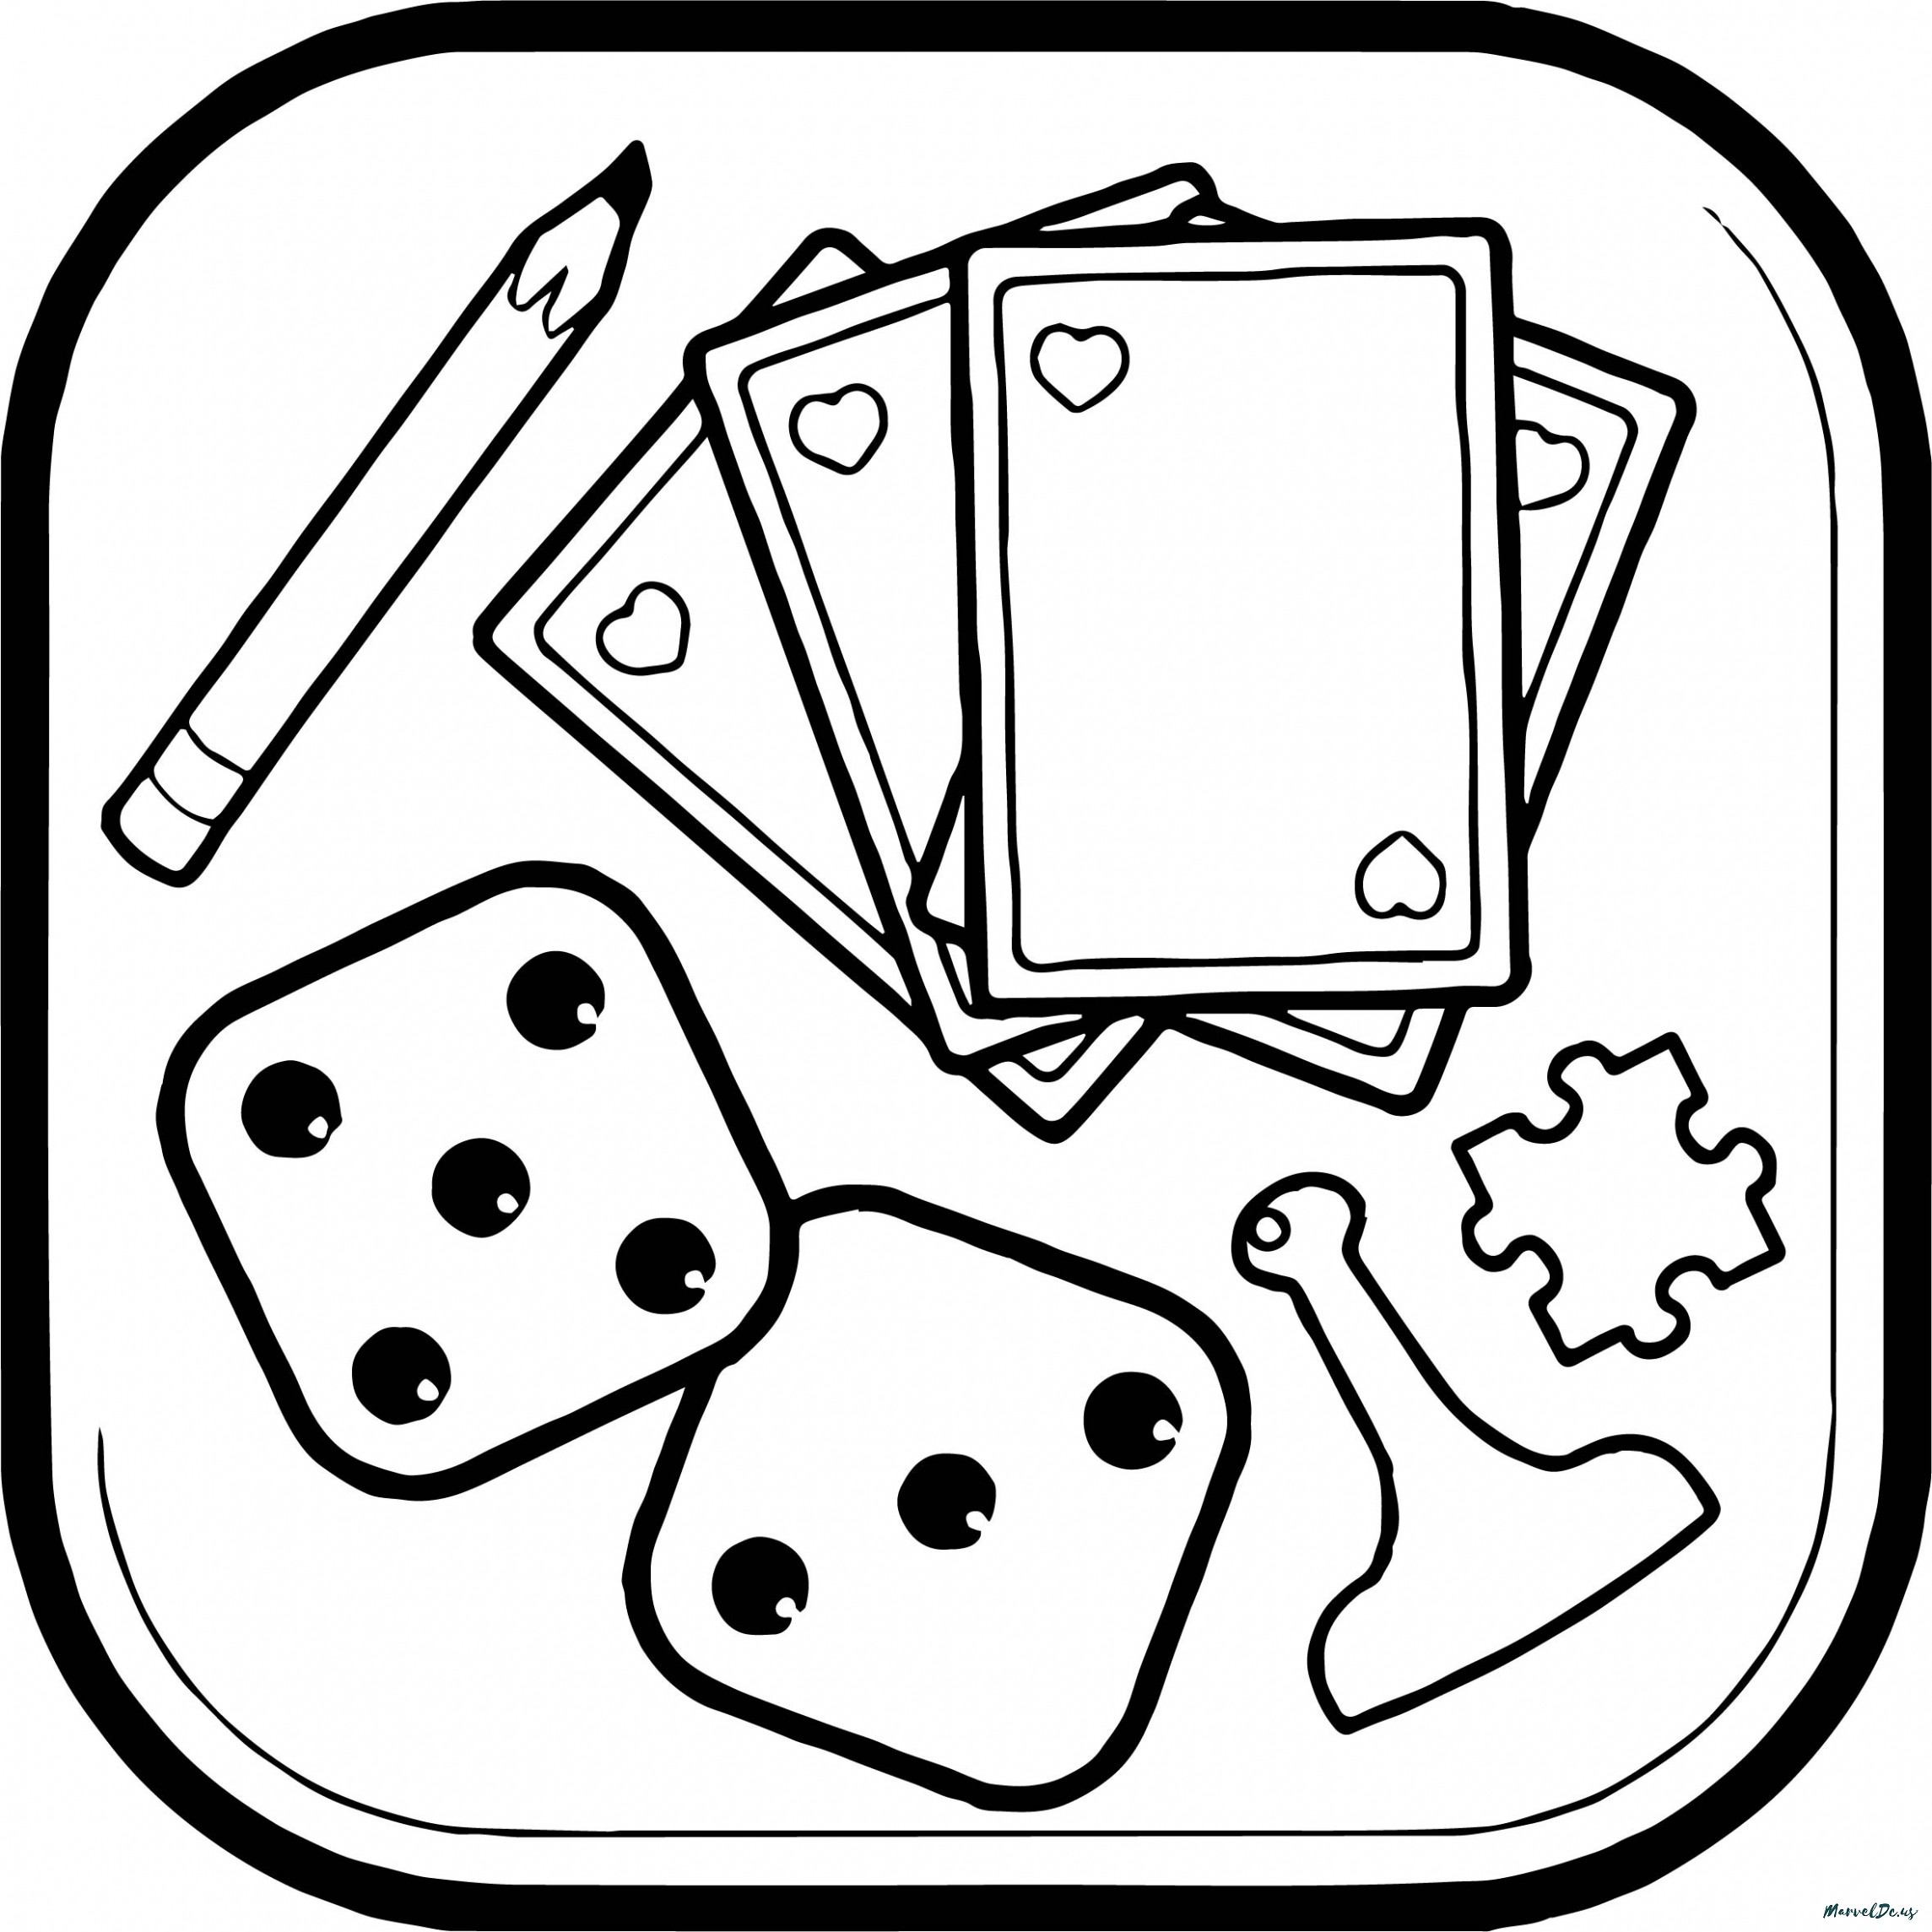 Coloring Games: Coloring Book & Painting for ios download free